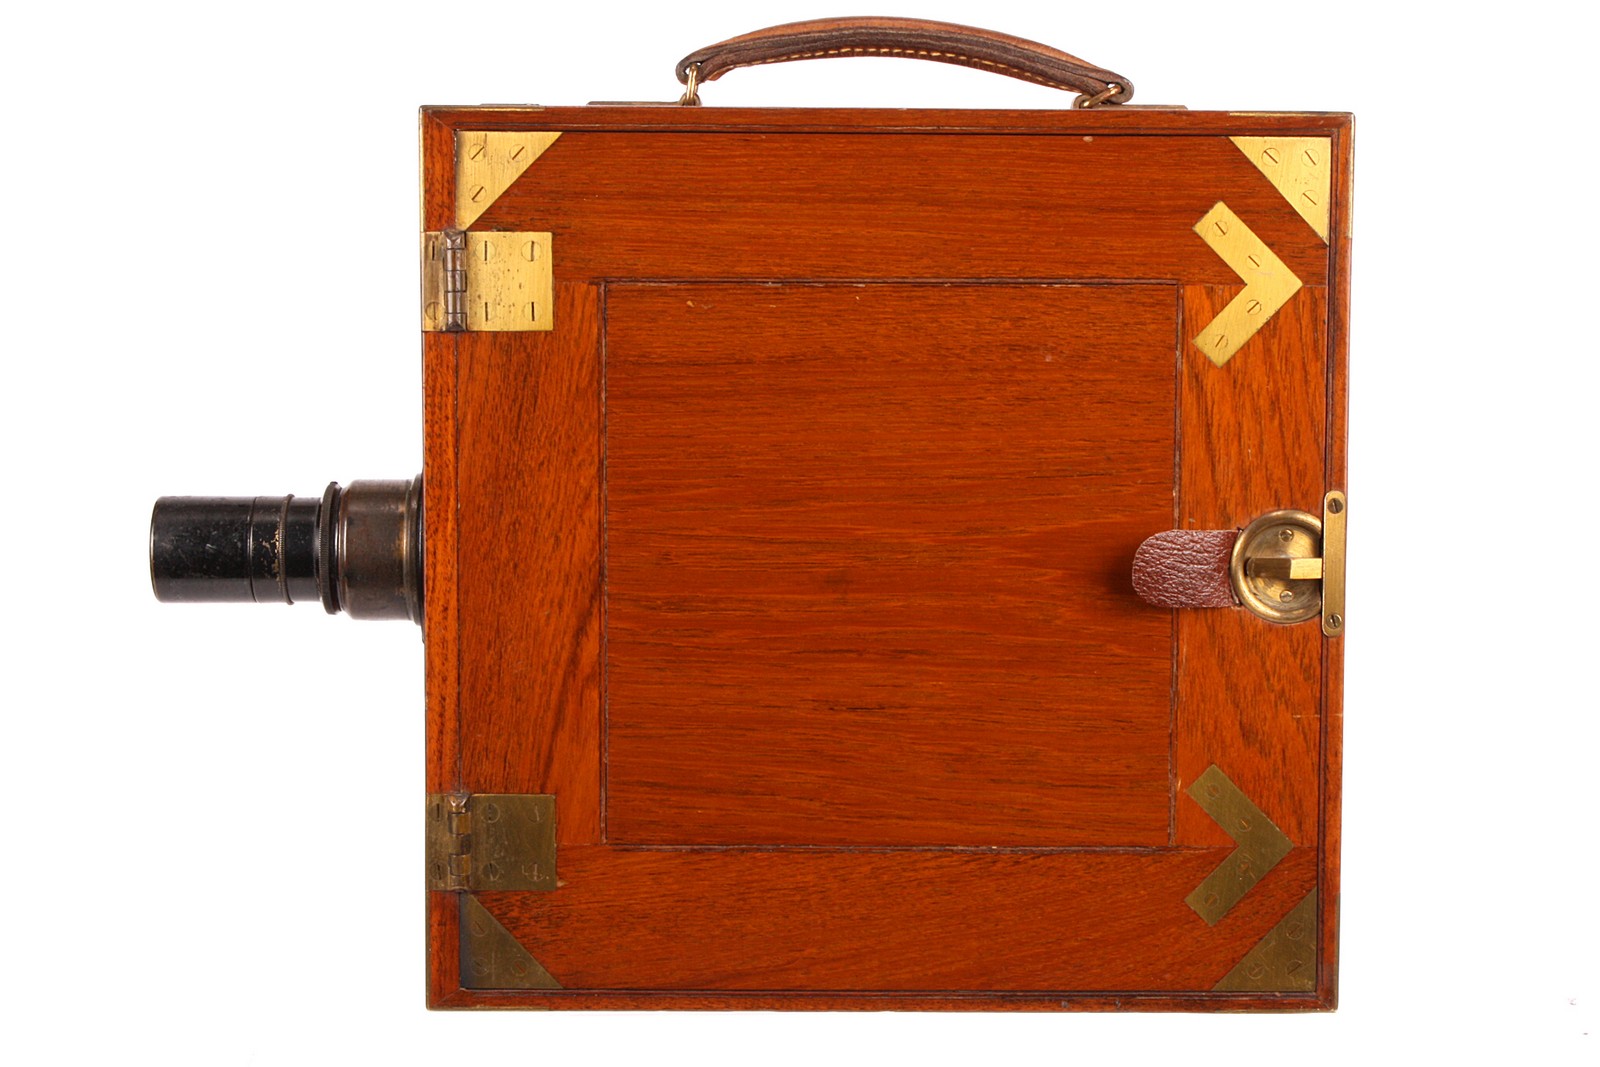 An Ensign Cinematograph Tropical 35mm Hand-Crank Camera, serial no. 343, c1914, polished brass bound - Image 4 of 5